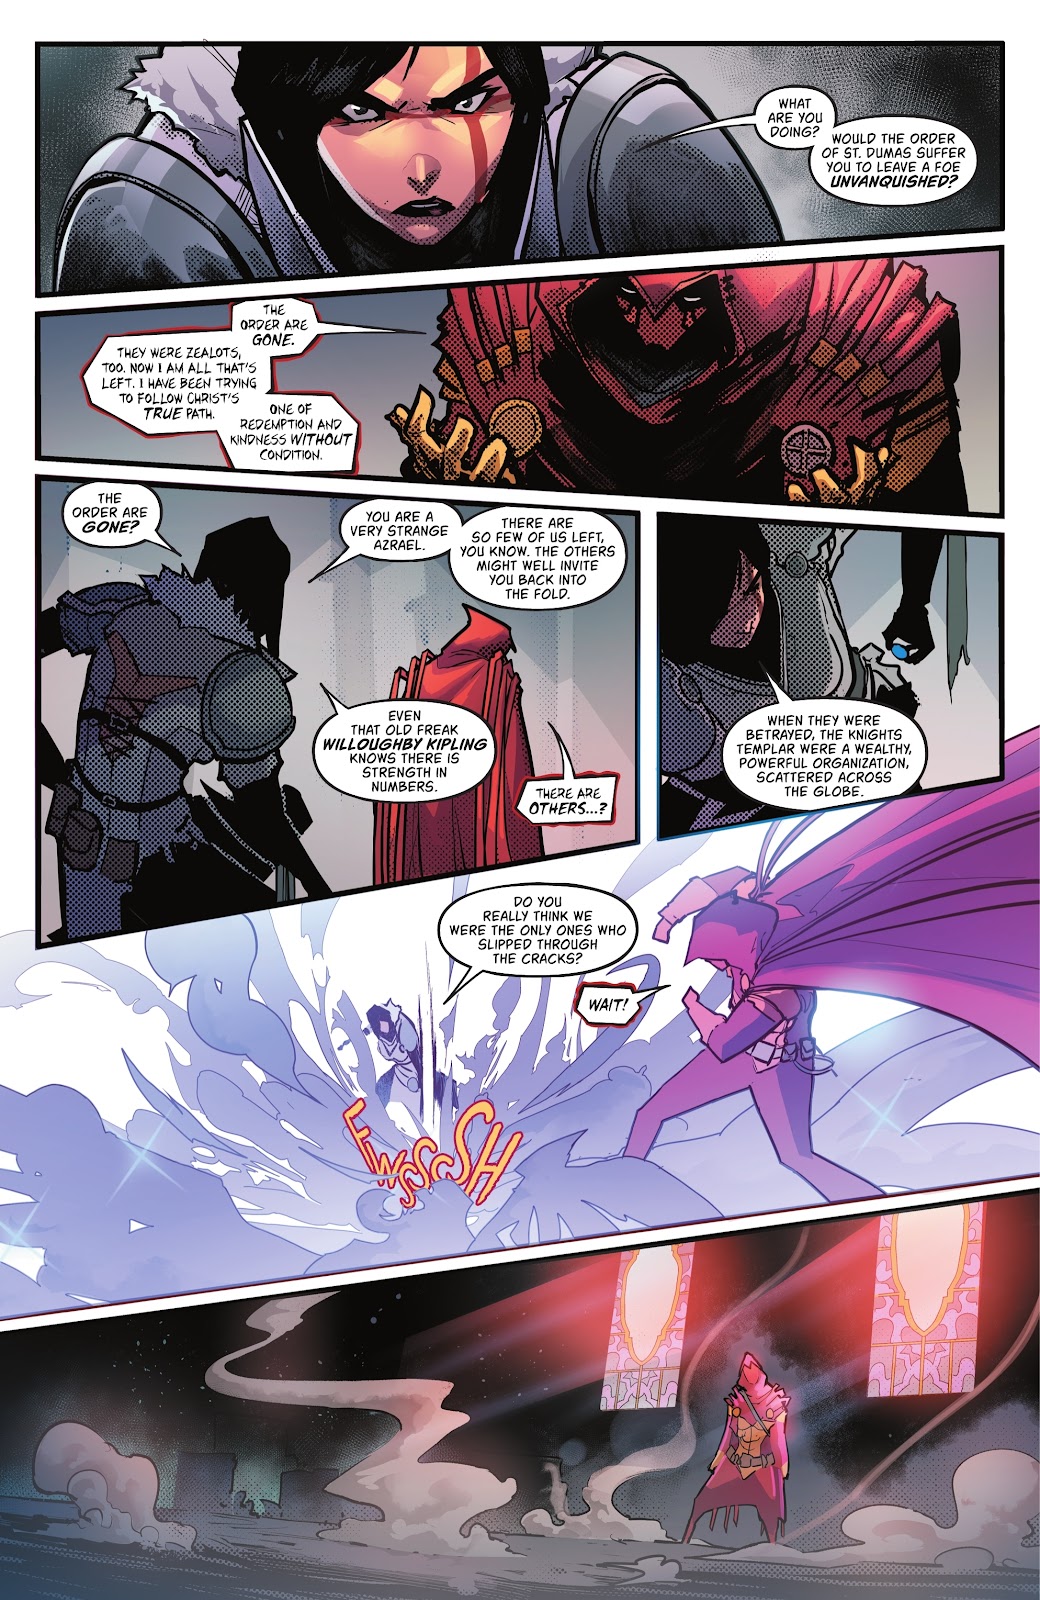 Sword of Azrael: Dark Knight of the Soul issue 1 - Page 30